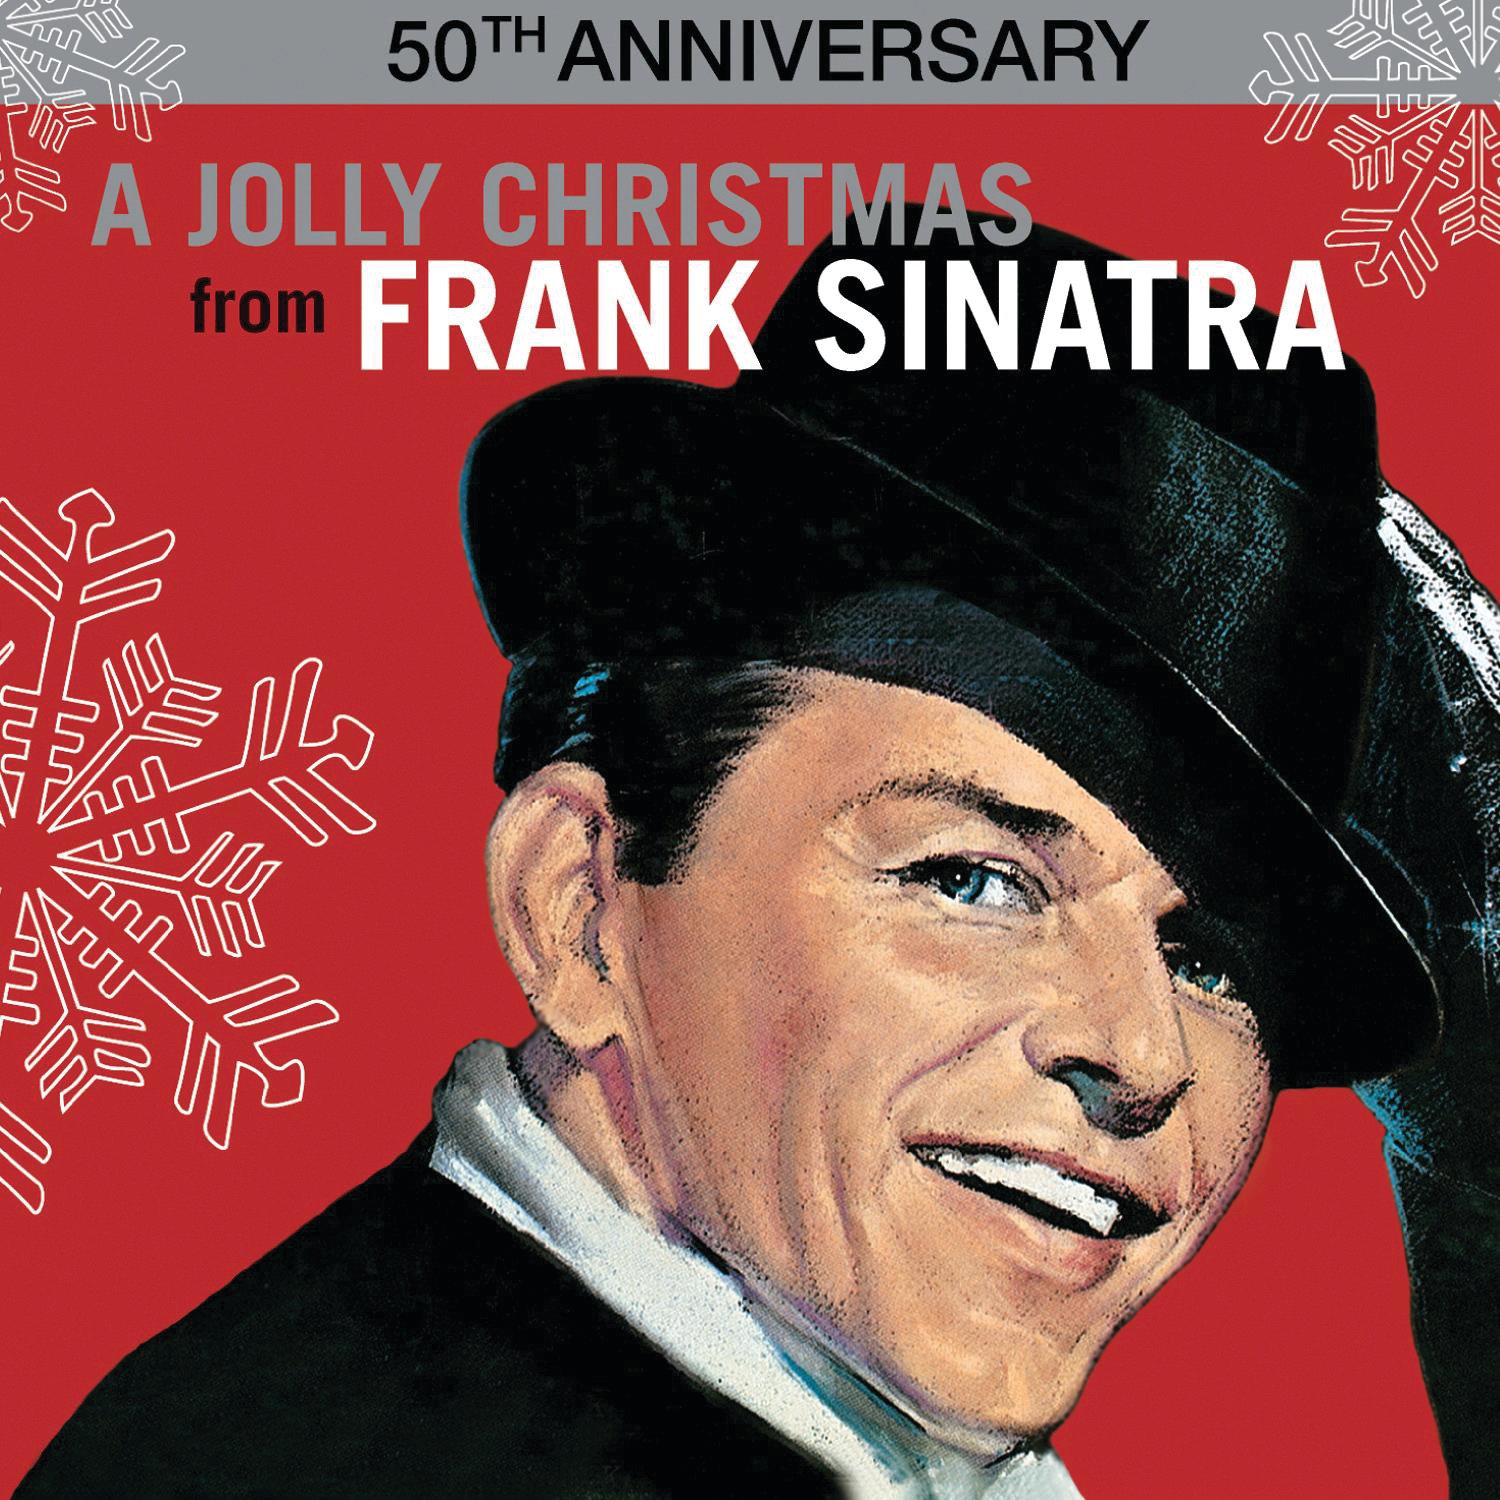 Art for Have Yourself a Merry Little Christmas by Frank Sinatra